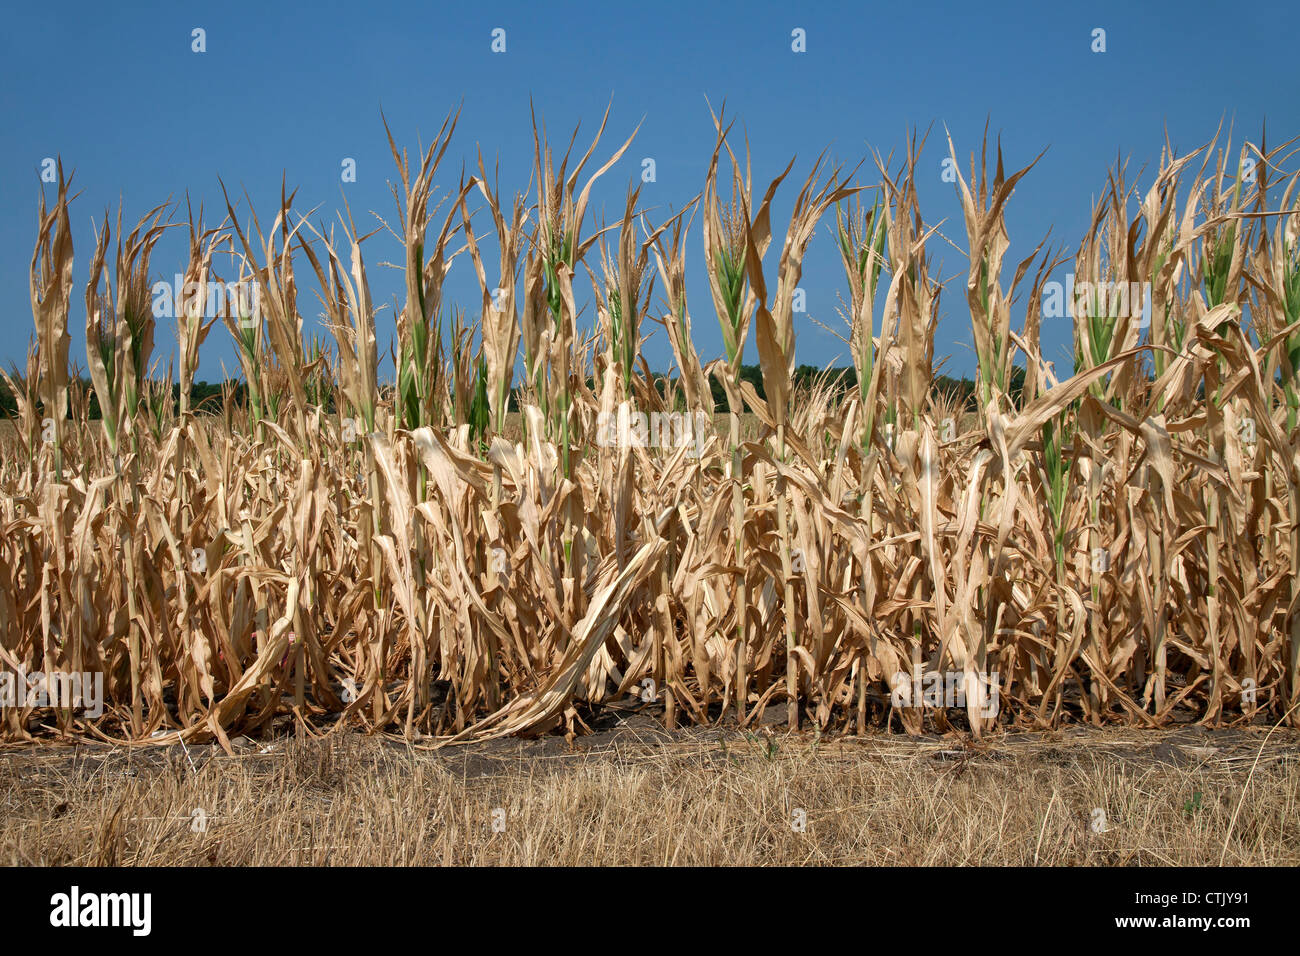 Corn crop suffering from drought conditions Indiana USA 2012 Stock Photo